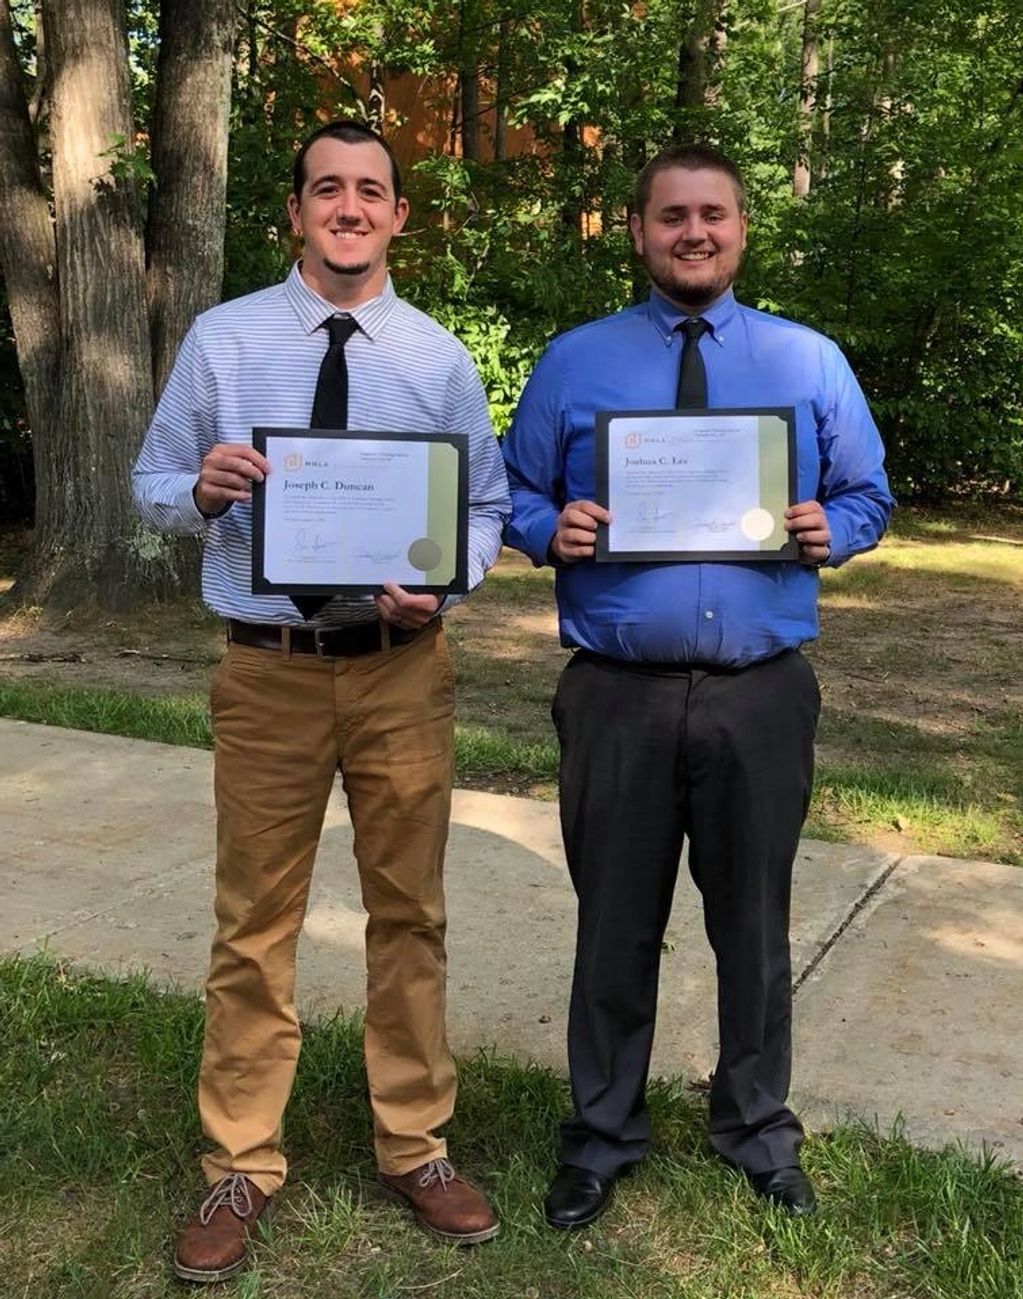 Congratulations Joseph Duncan and Josh Lee for Graduating today from NHLA Lumber Inspection School, 